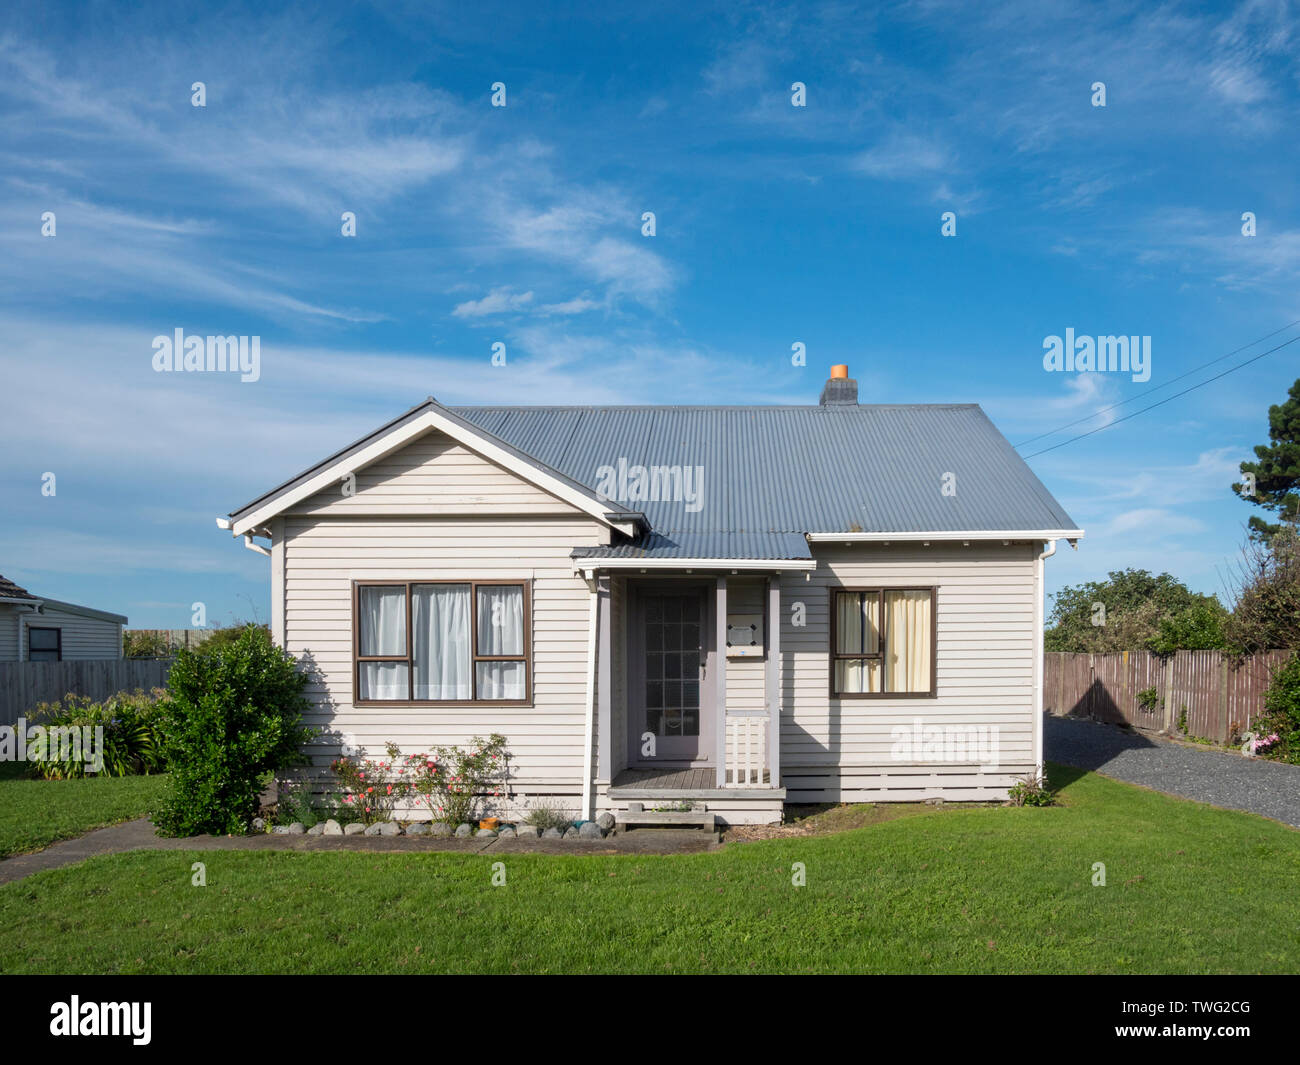 A wood clad or clapperboard house in Kaikoura New Zealand Stock Photo